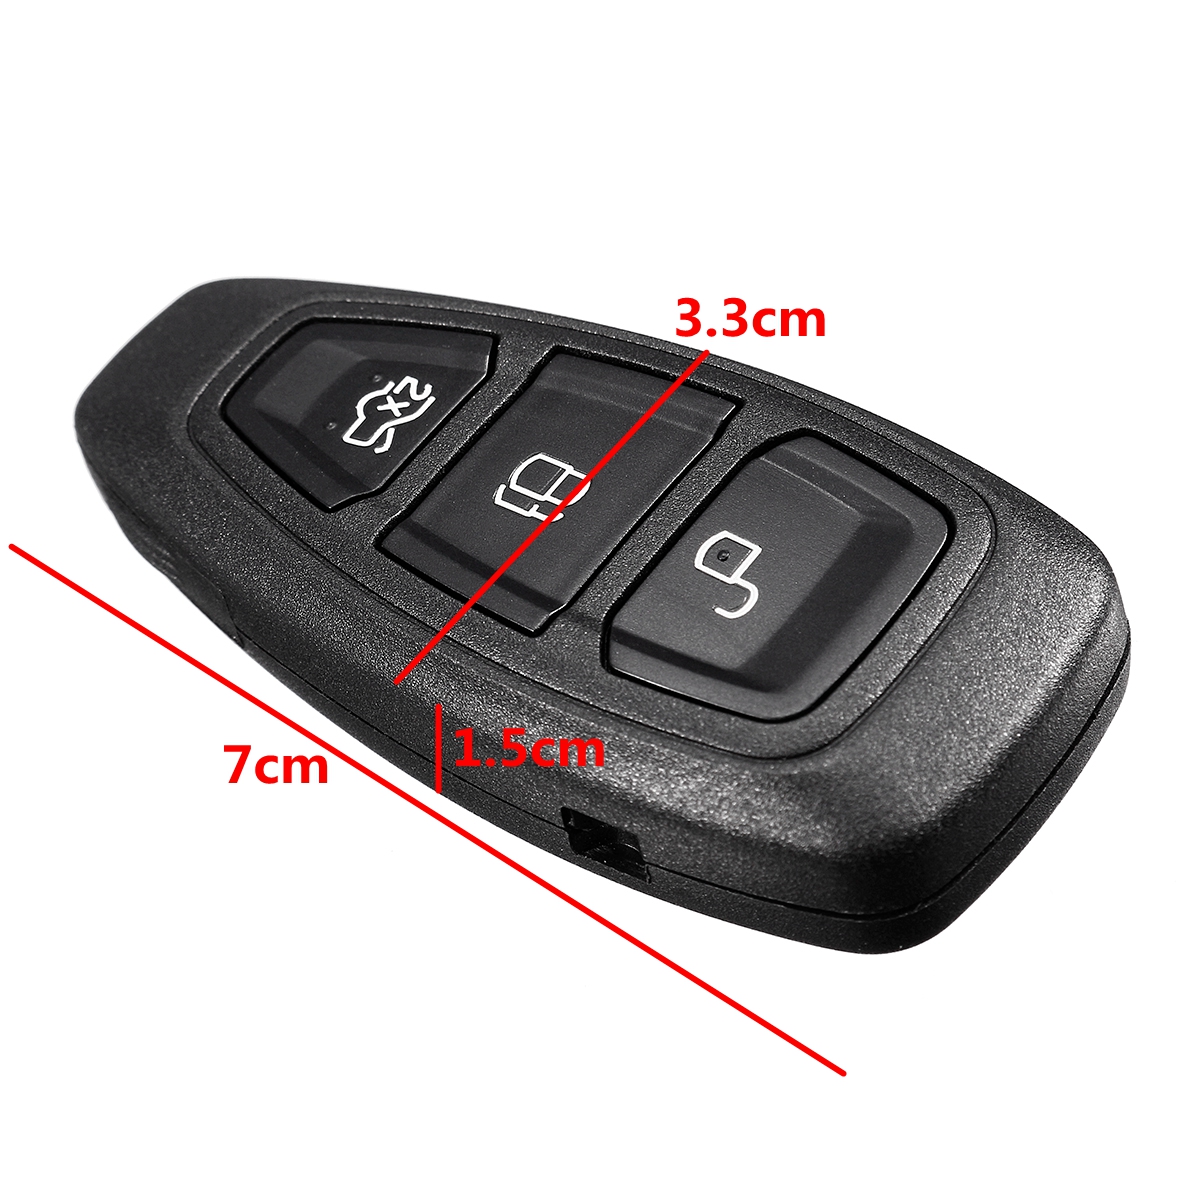 3-Buttons-Remote-Key-Fob-433MHz-Replacement-for-Ford-B-Max-C-Max-KR55WK48801-1343948